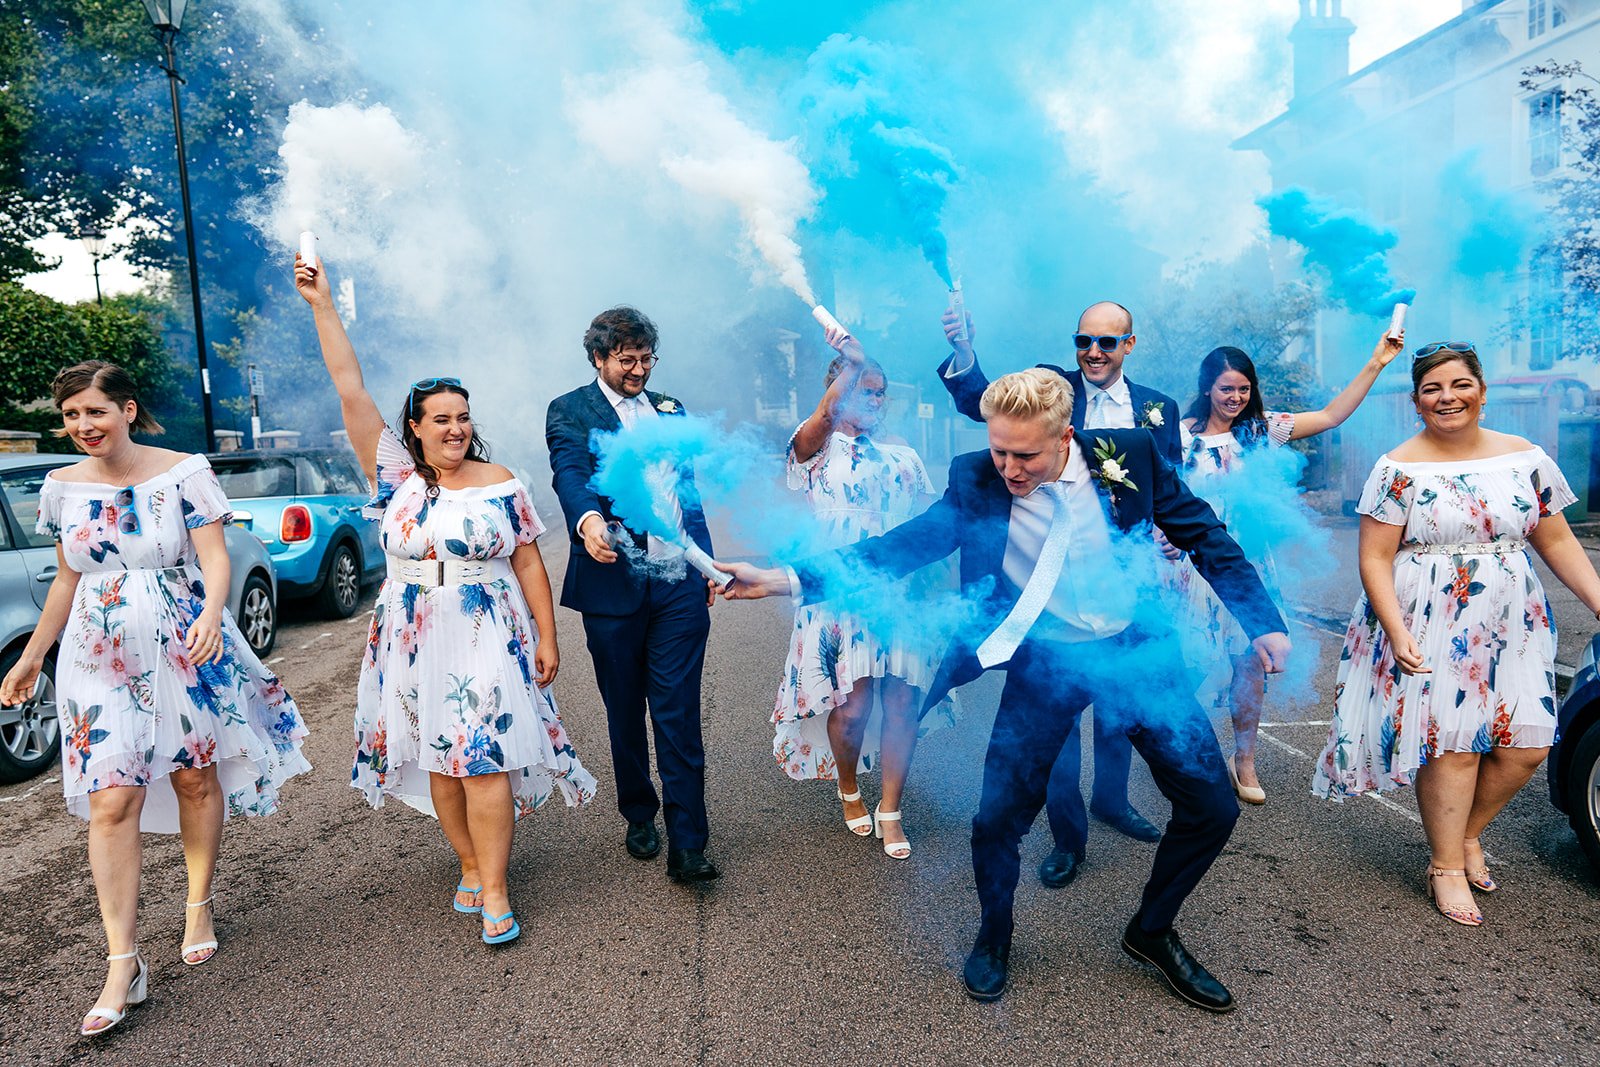  Blue Smoke Bombs Wedding Party Street Fun South London  Jordanna Marston Photography   Dita Rosted Events London Wedding &amp; Events Management Coordination service  